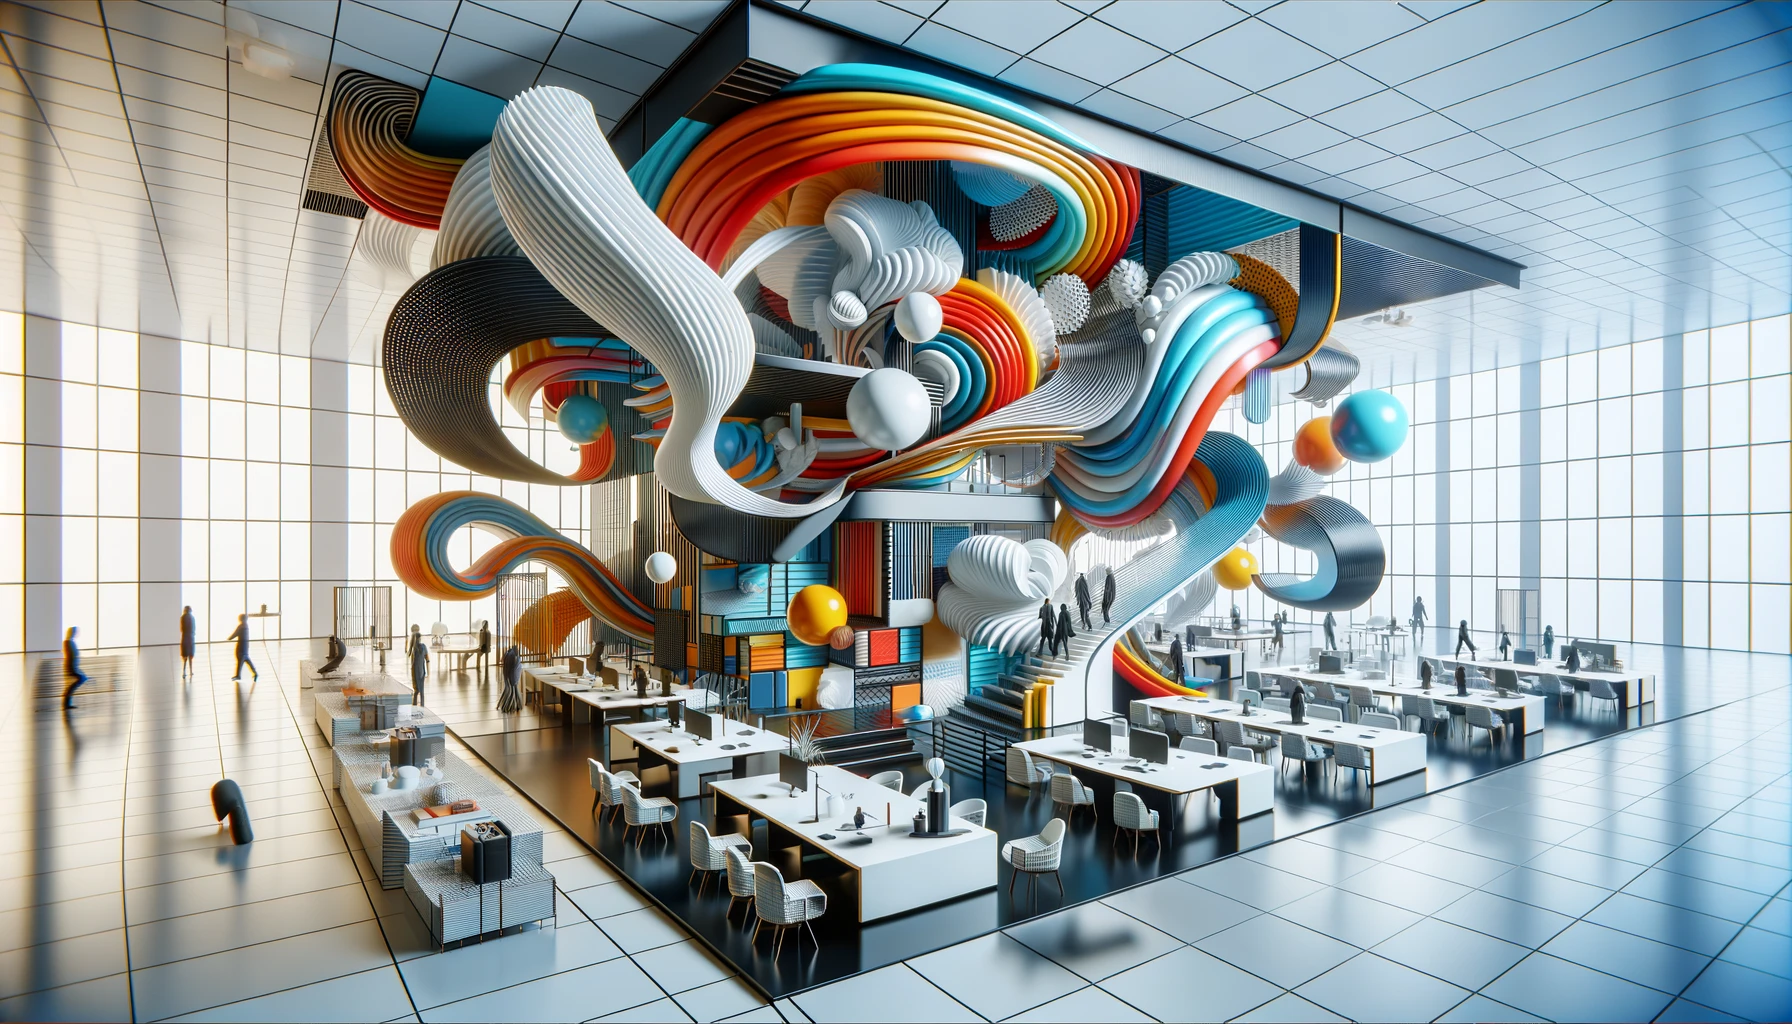 Abstract office scene with modular furniture and fluid design elements in bold colors, symbolizing the adaptability of businesses to changing customer needs. The image focuses on innovation and flexibility in a corporate environment, using vibrant colors and shapes to convey a dynamic approach to customer-focused strategies.